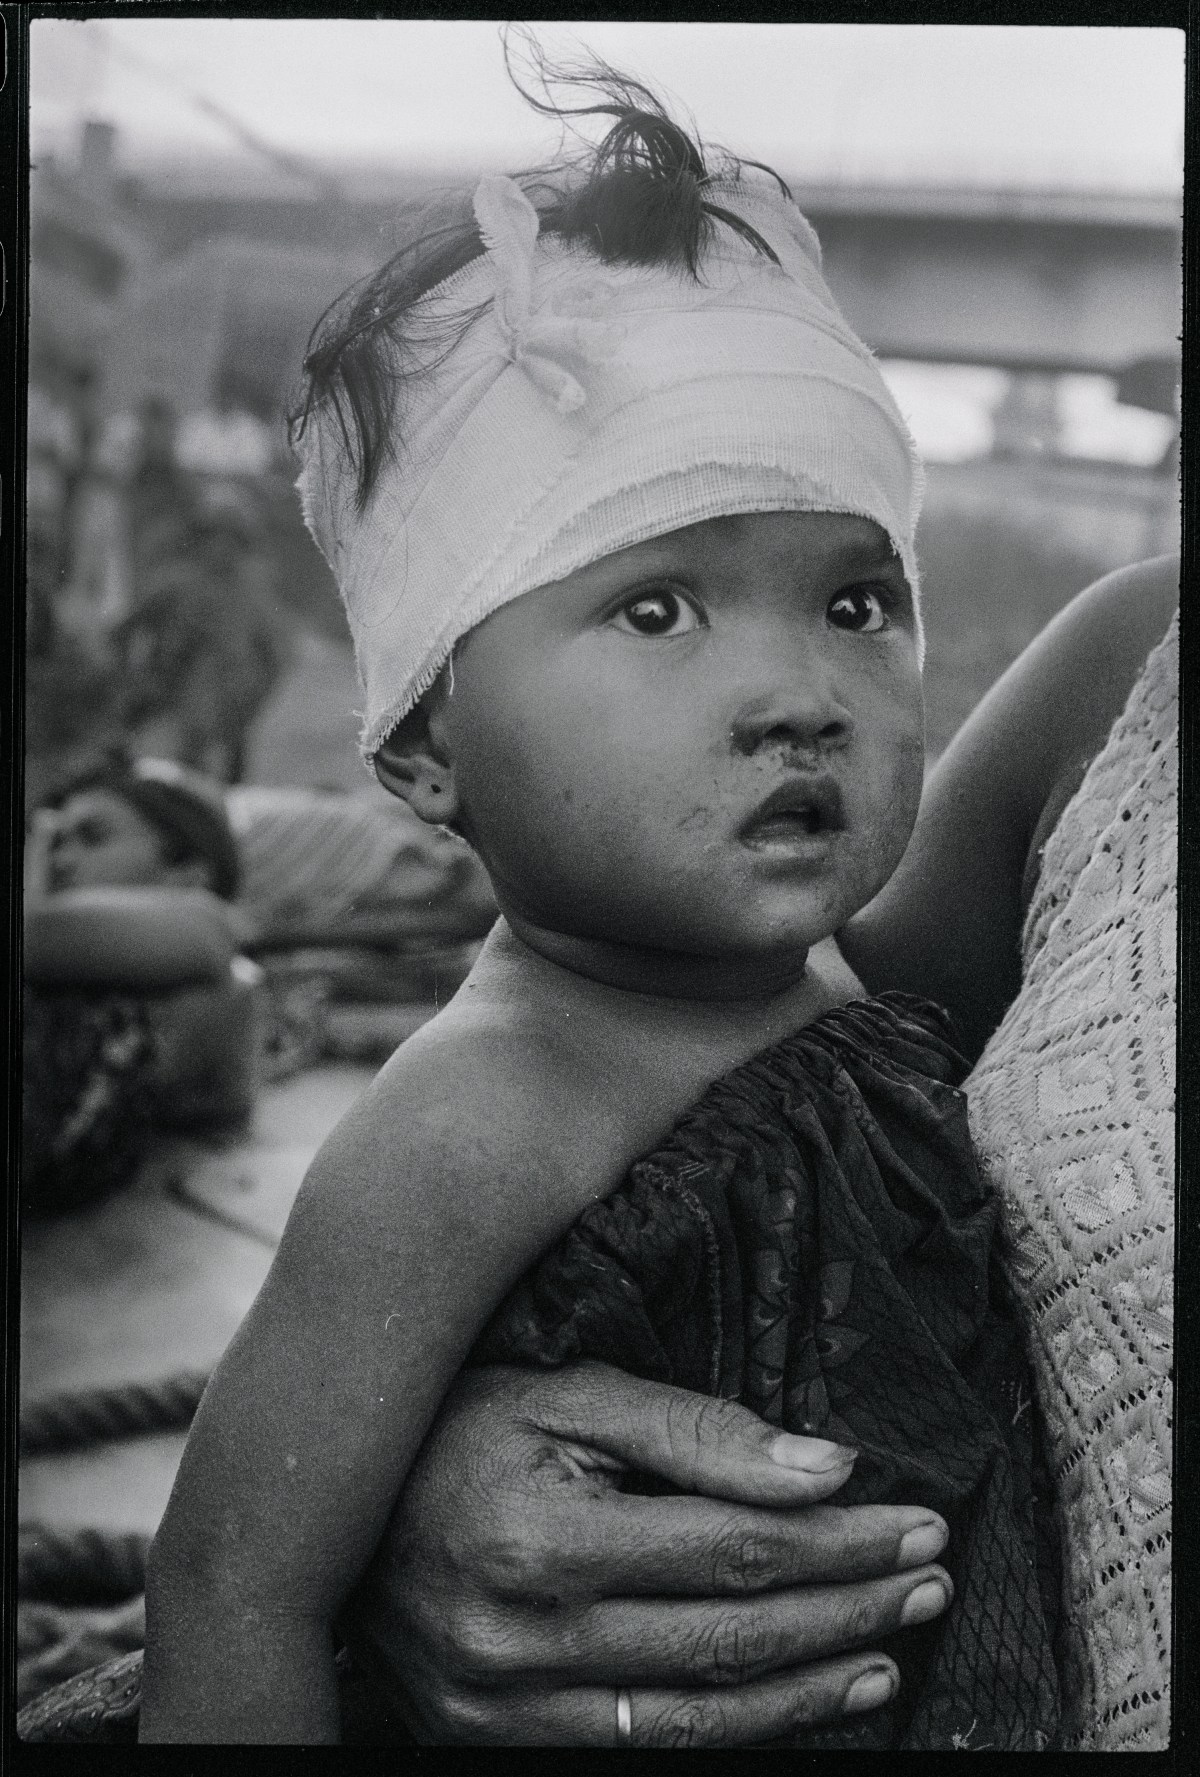 (Original Caption) Victim of U.S. Bombing Error. Phnom Penh: Wearing head bandage, this young Cambodian youngster is one of some 300 casualties of bombing error on Neak Luong by U.S. warplanes August 6. He and other victims are awaiting transportation to hospital after having been brought here by Navy boats August 7.